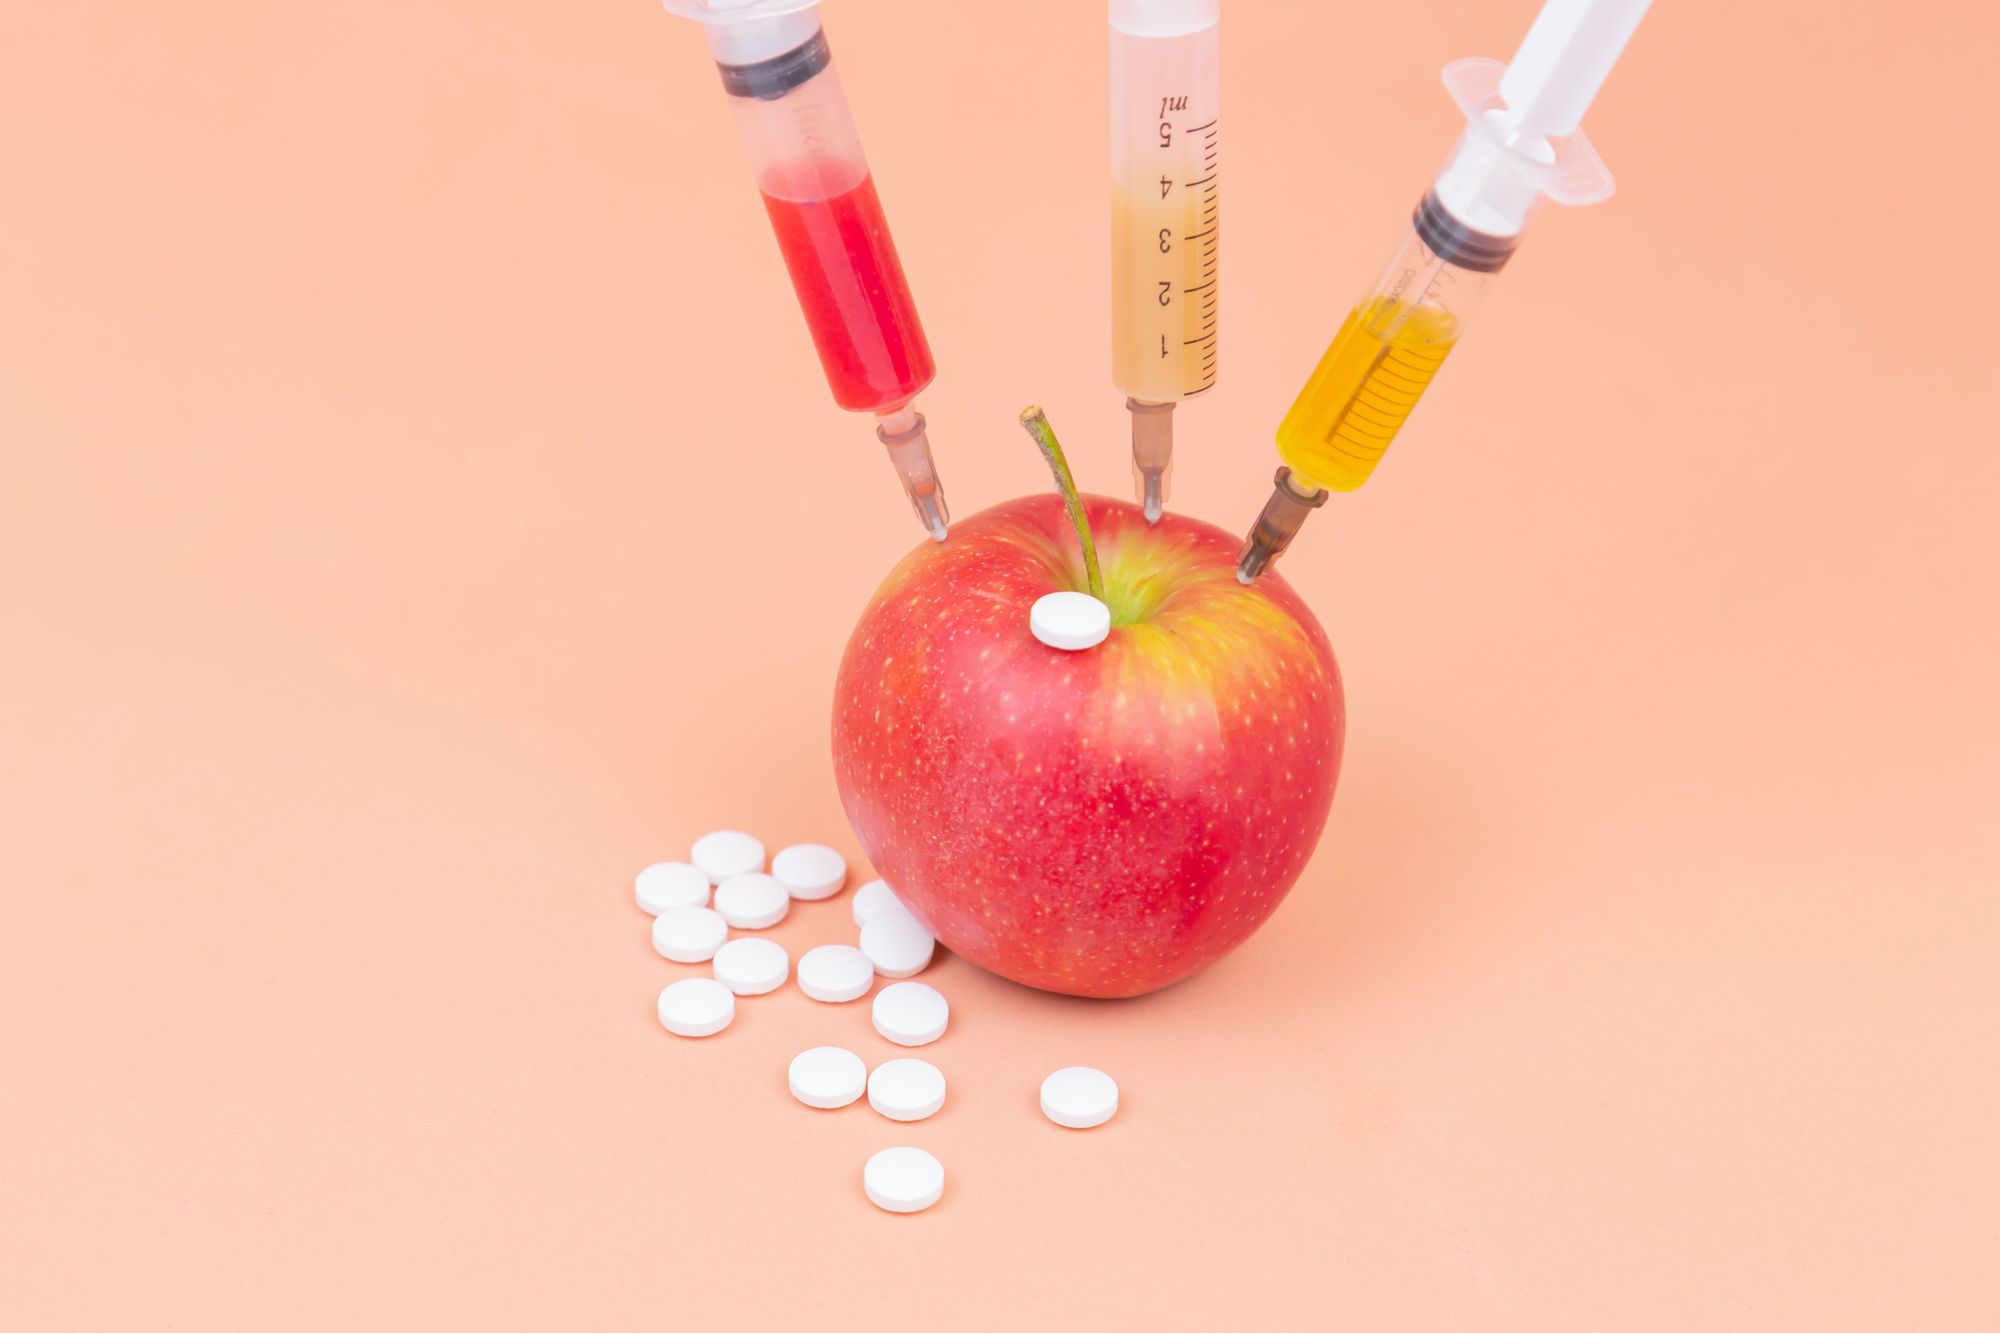 injecting medicines in an apple